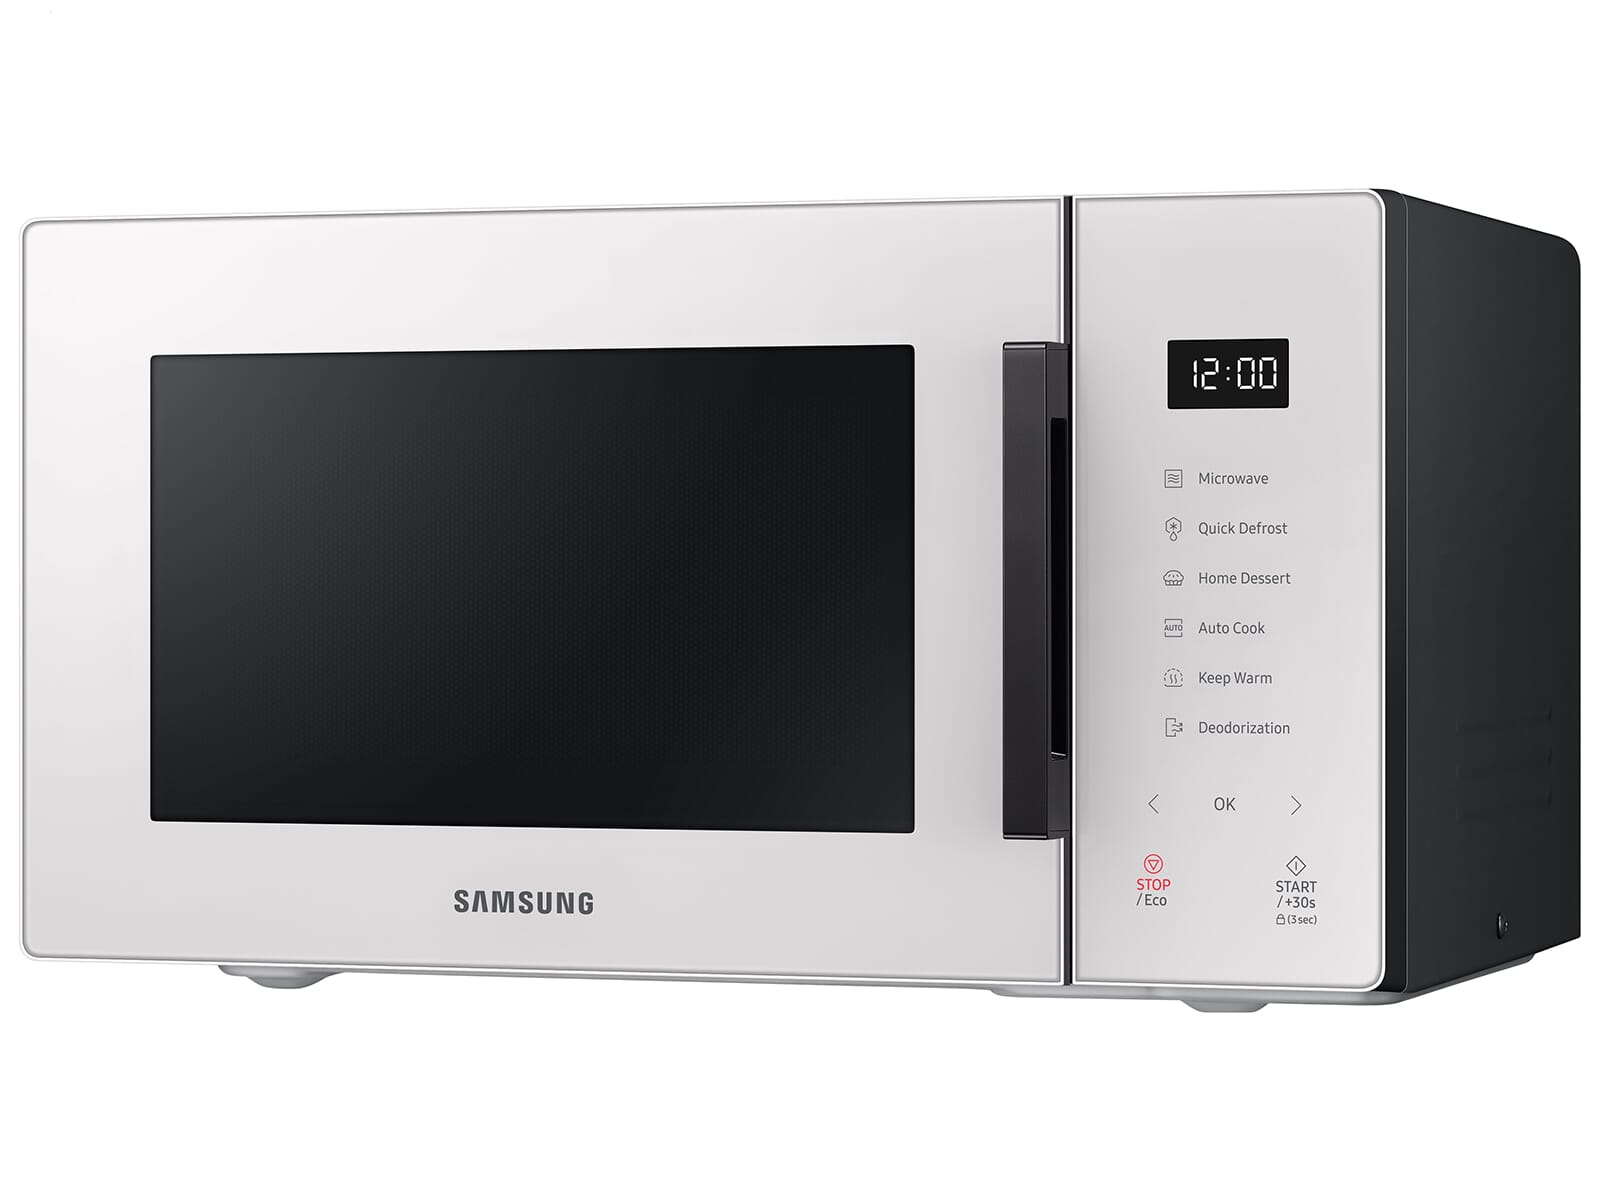 Samsung Bespoke Creme Stand-Mikrowelle MS2GT5018AE/EG